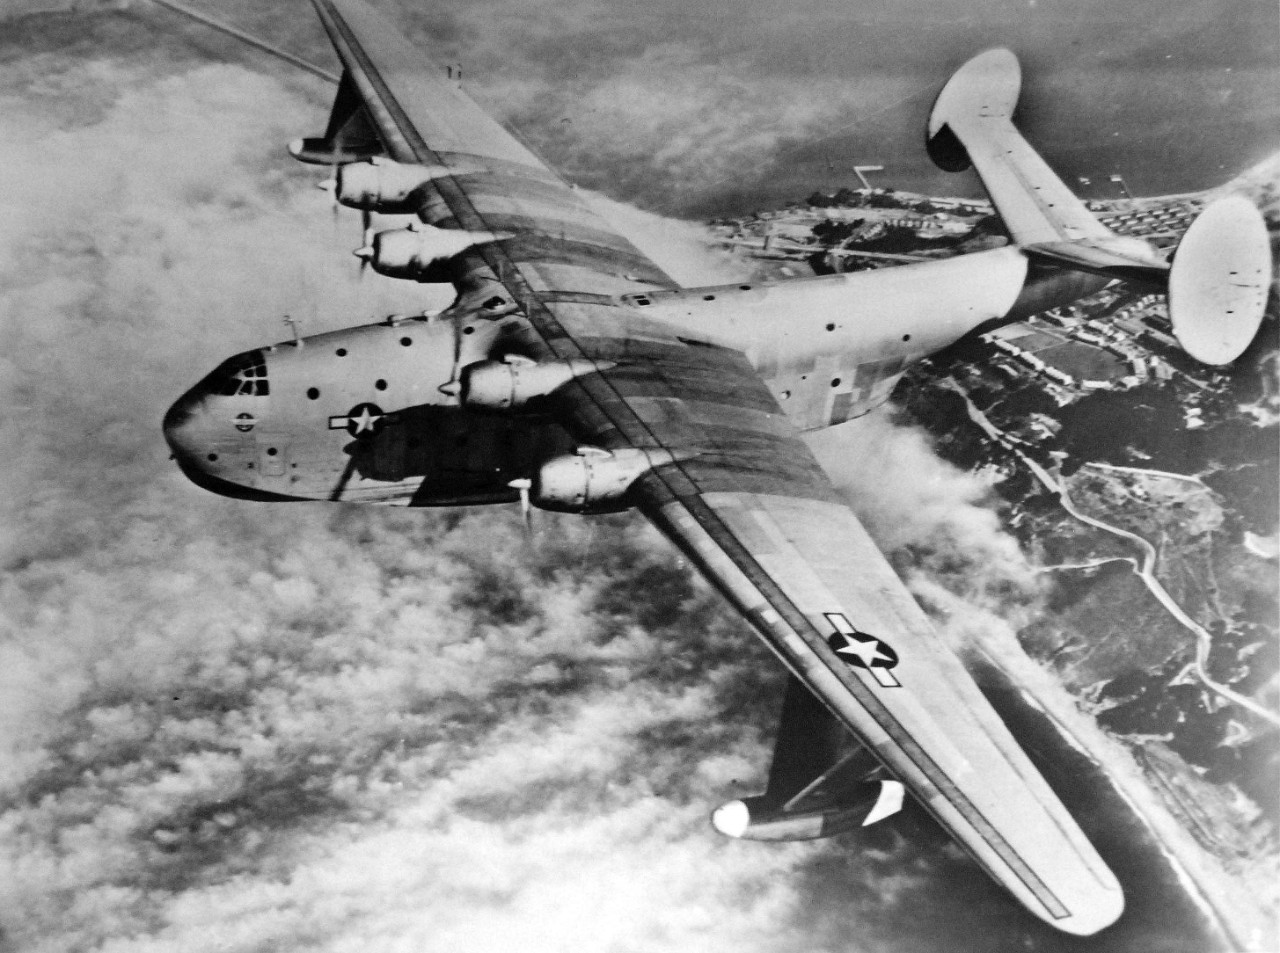 LC-Lot-9827-2: Martin JRM “Mars” aircraft, XPB2M-1, 1941. A close-up view of the Mars aircraft bound from San Francisco fully laden with materials vitally needed in the Pacific war period. Soon twenty more of these vast cargo ships of the air will be added to the fleet by NATS. Album from The Glenn L. Martin Company, Baltimore, Maryland, 1941. Courtesy of the Library of Congress. 